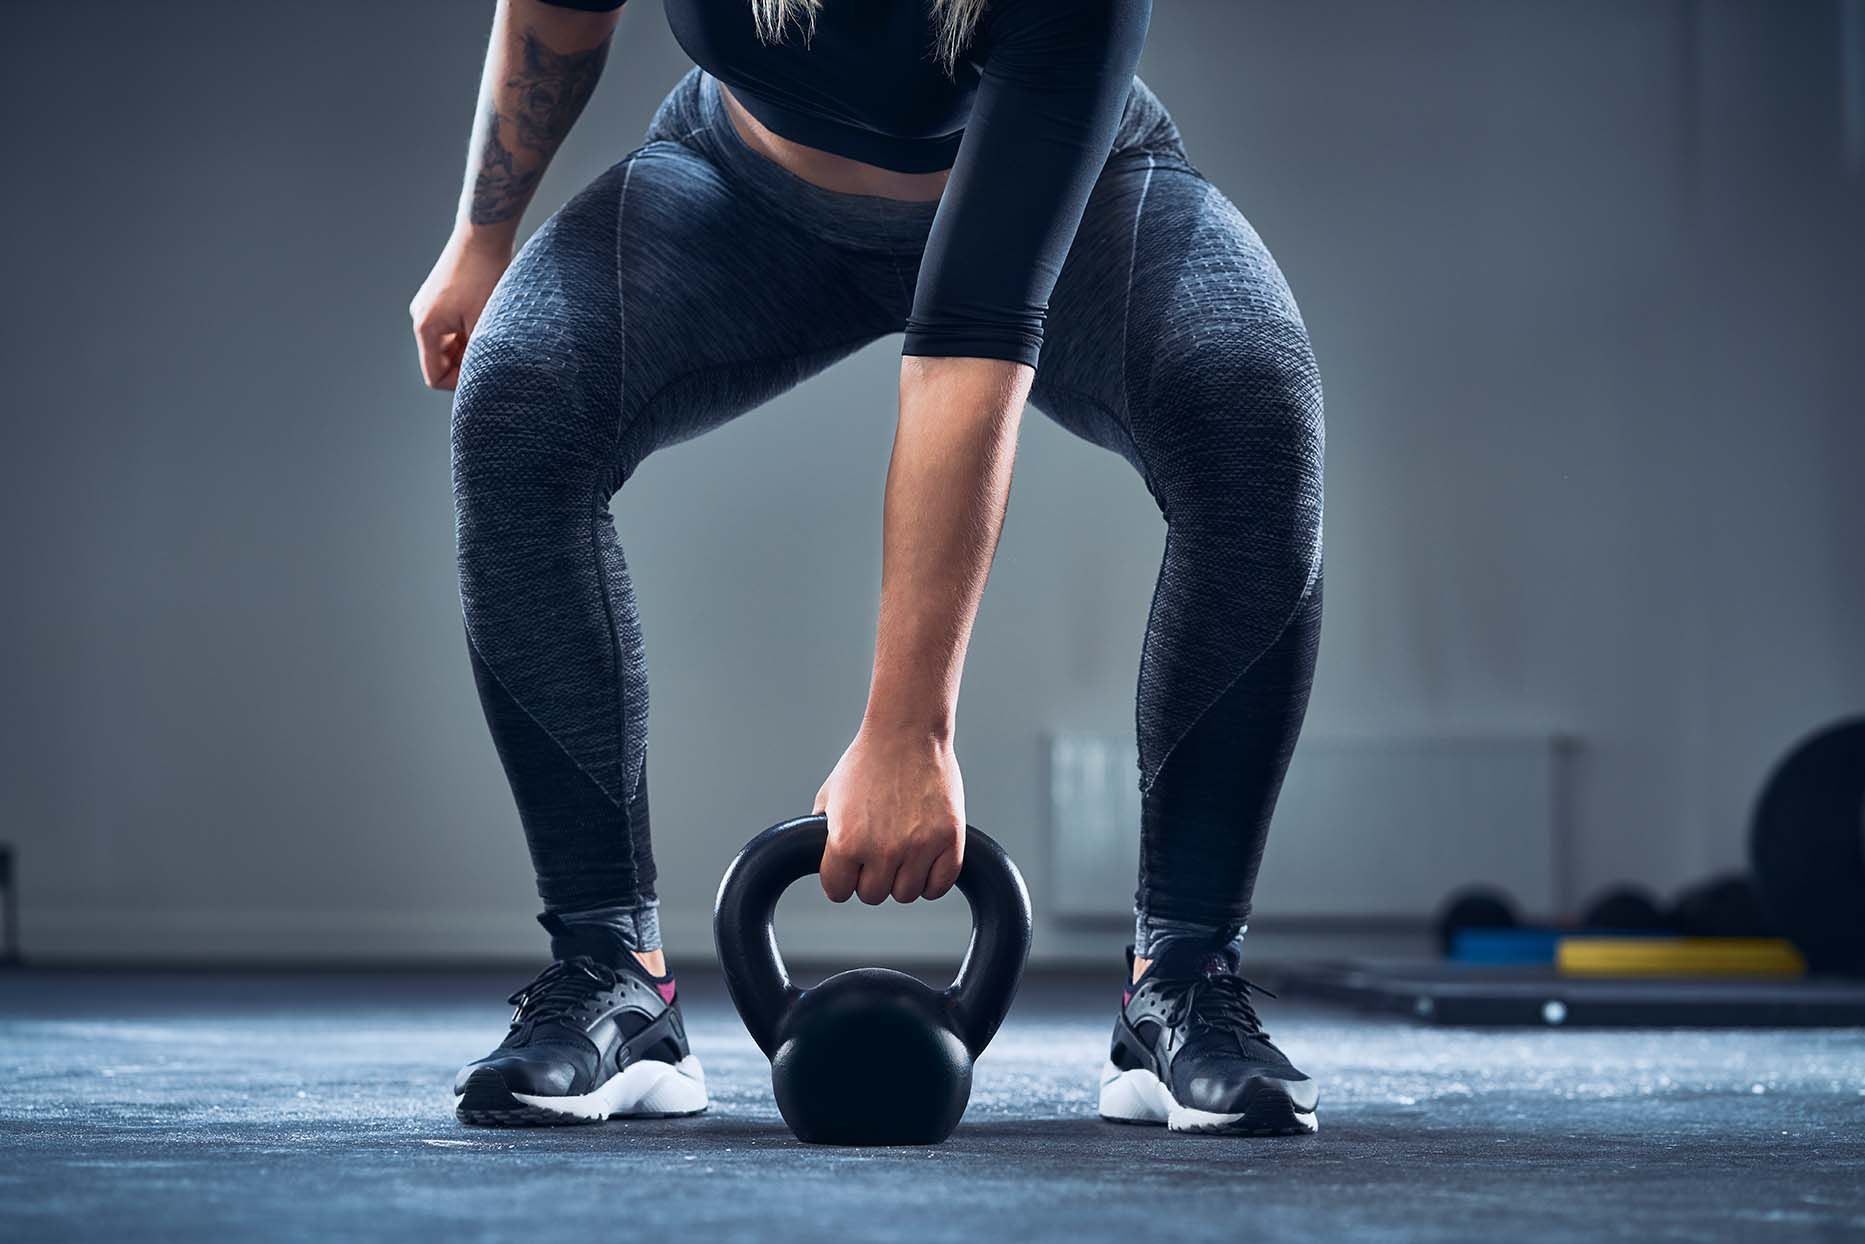 Kettlebell workout: Things You Must Know Before You Begin